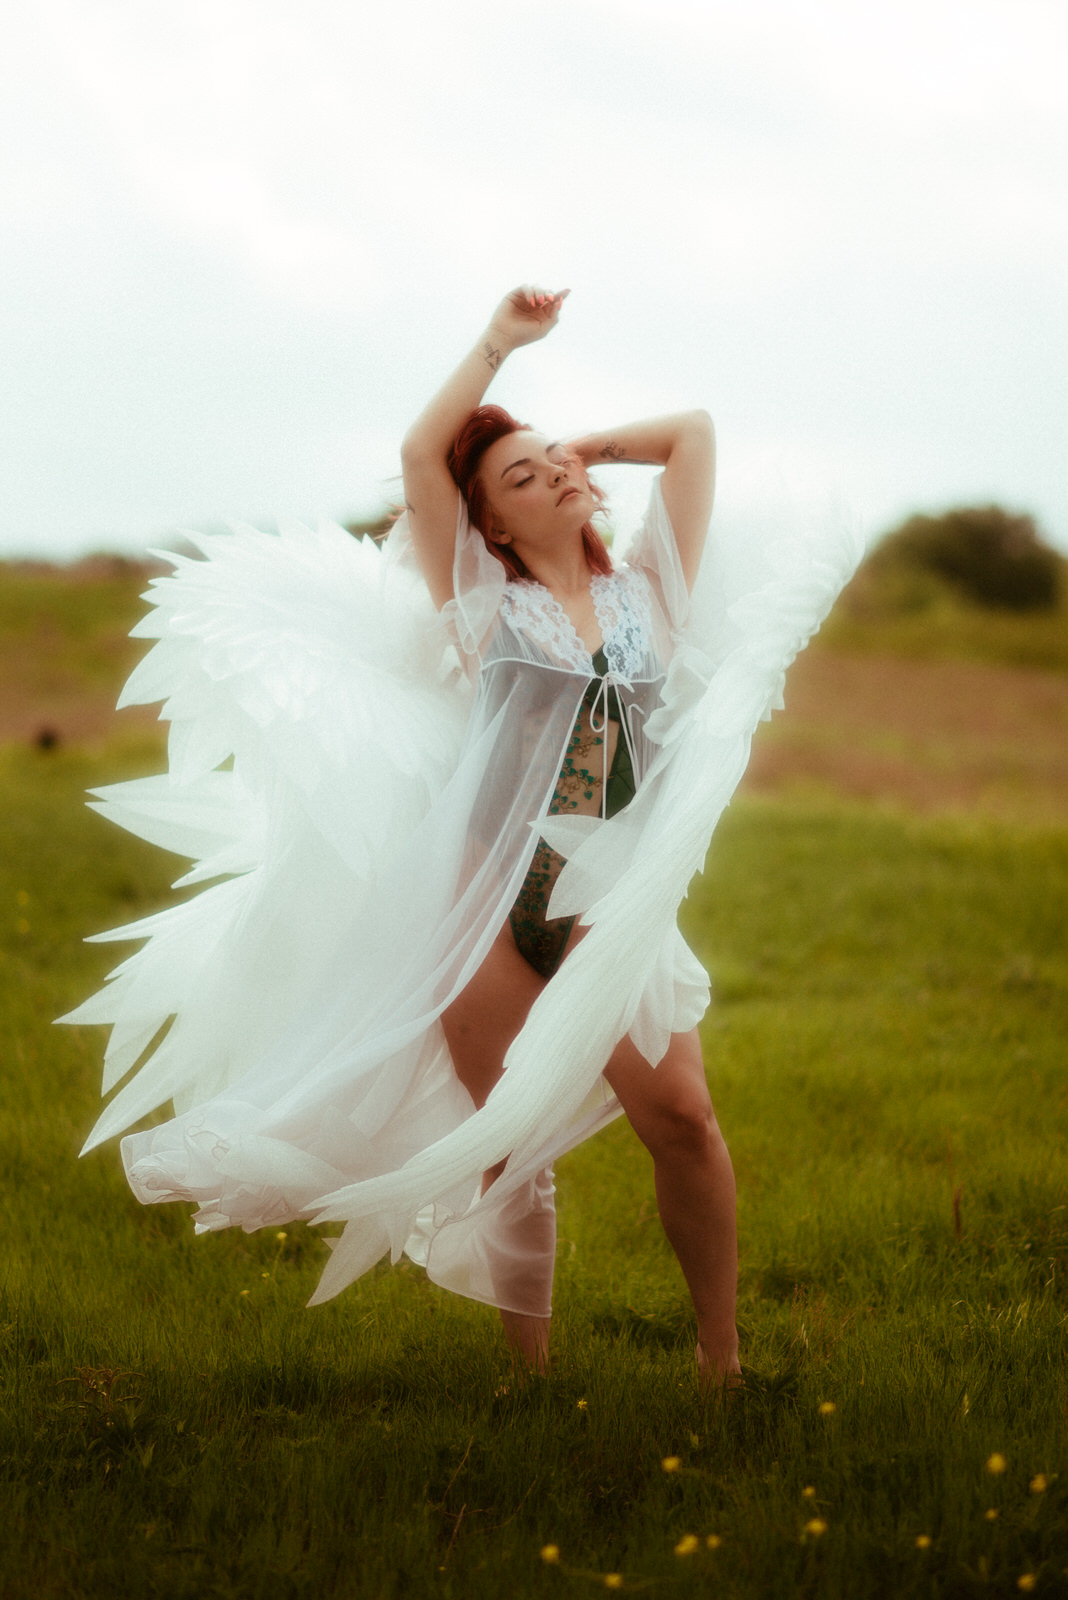 Outdoor photoshoot with large angel wings blowing in the wind